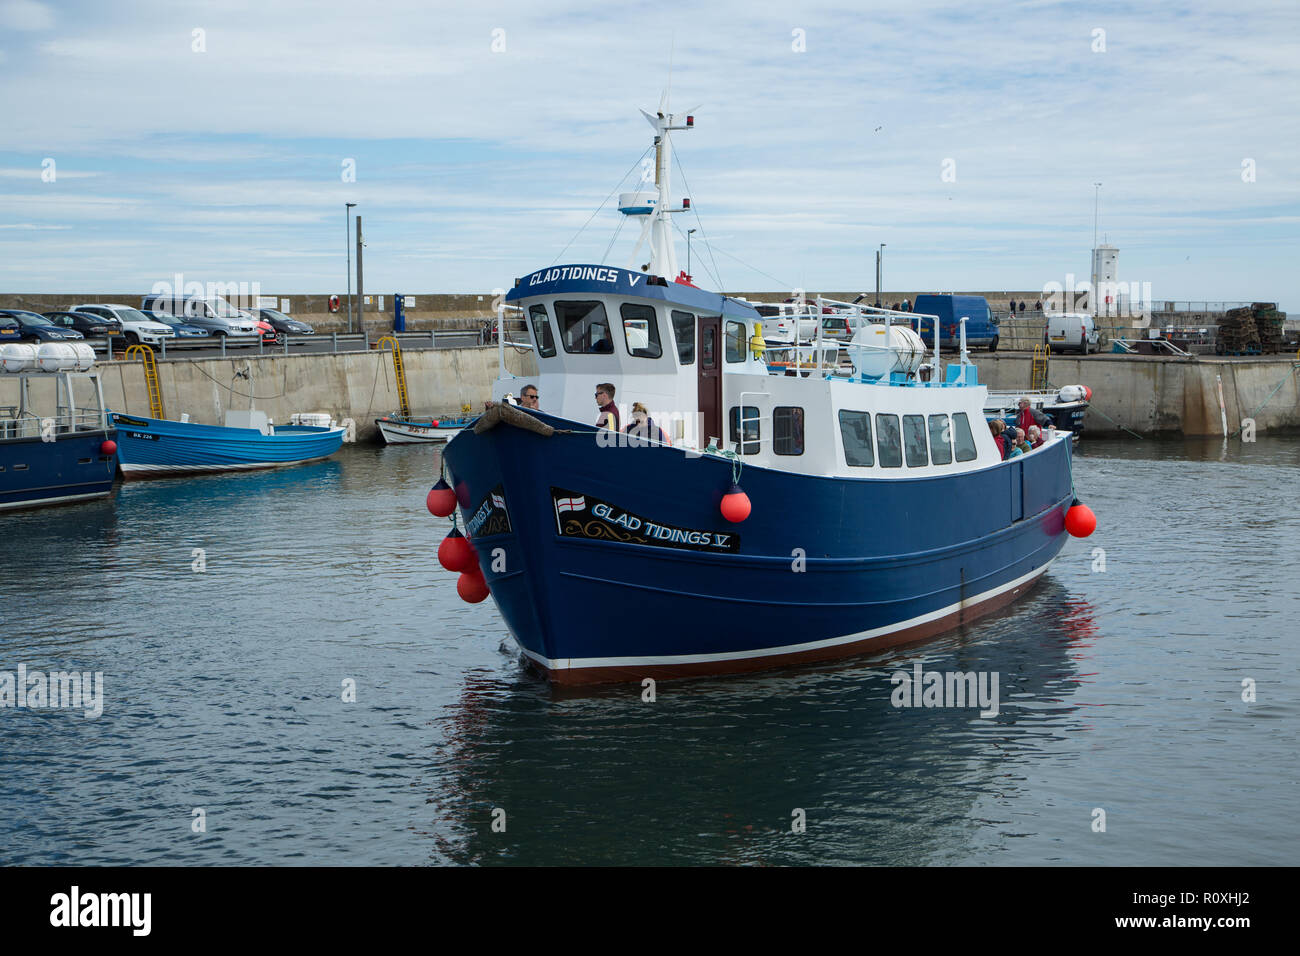 Glad Tidings Cruise Boat for the Farne Islands coming in to dock at Seahouses harbour, Seahouses village, Northumberland, UK Stock Photo